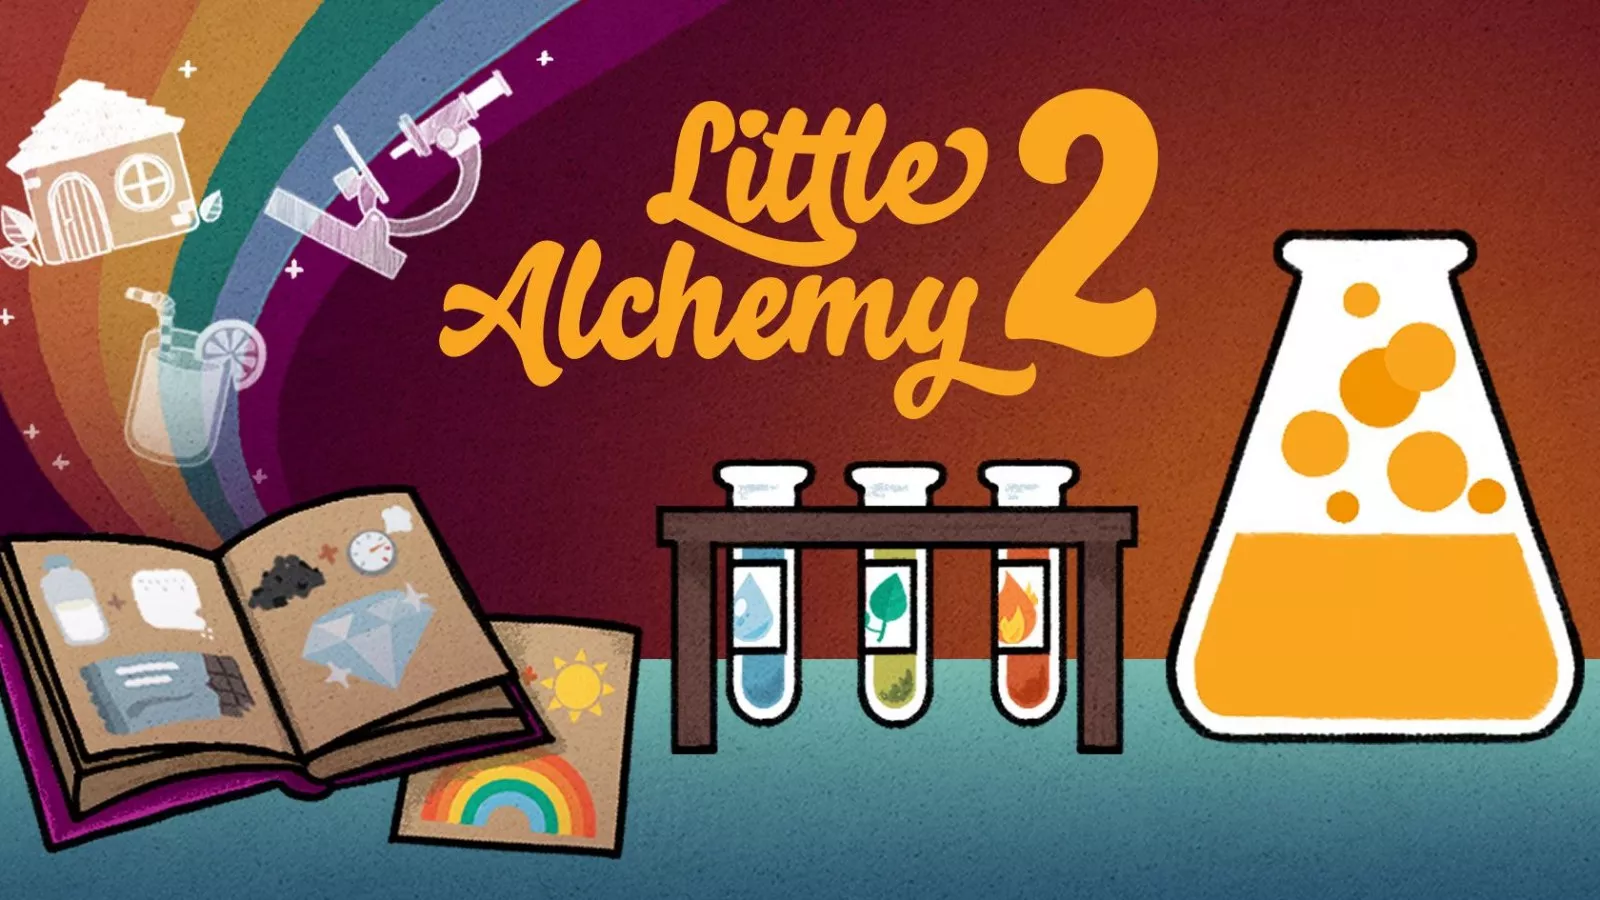 How to make valhalla - Little Alchemy 2 Official Hints and Cheats